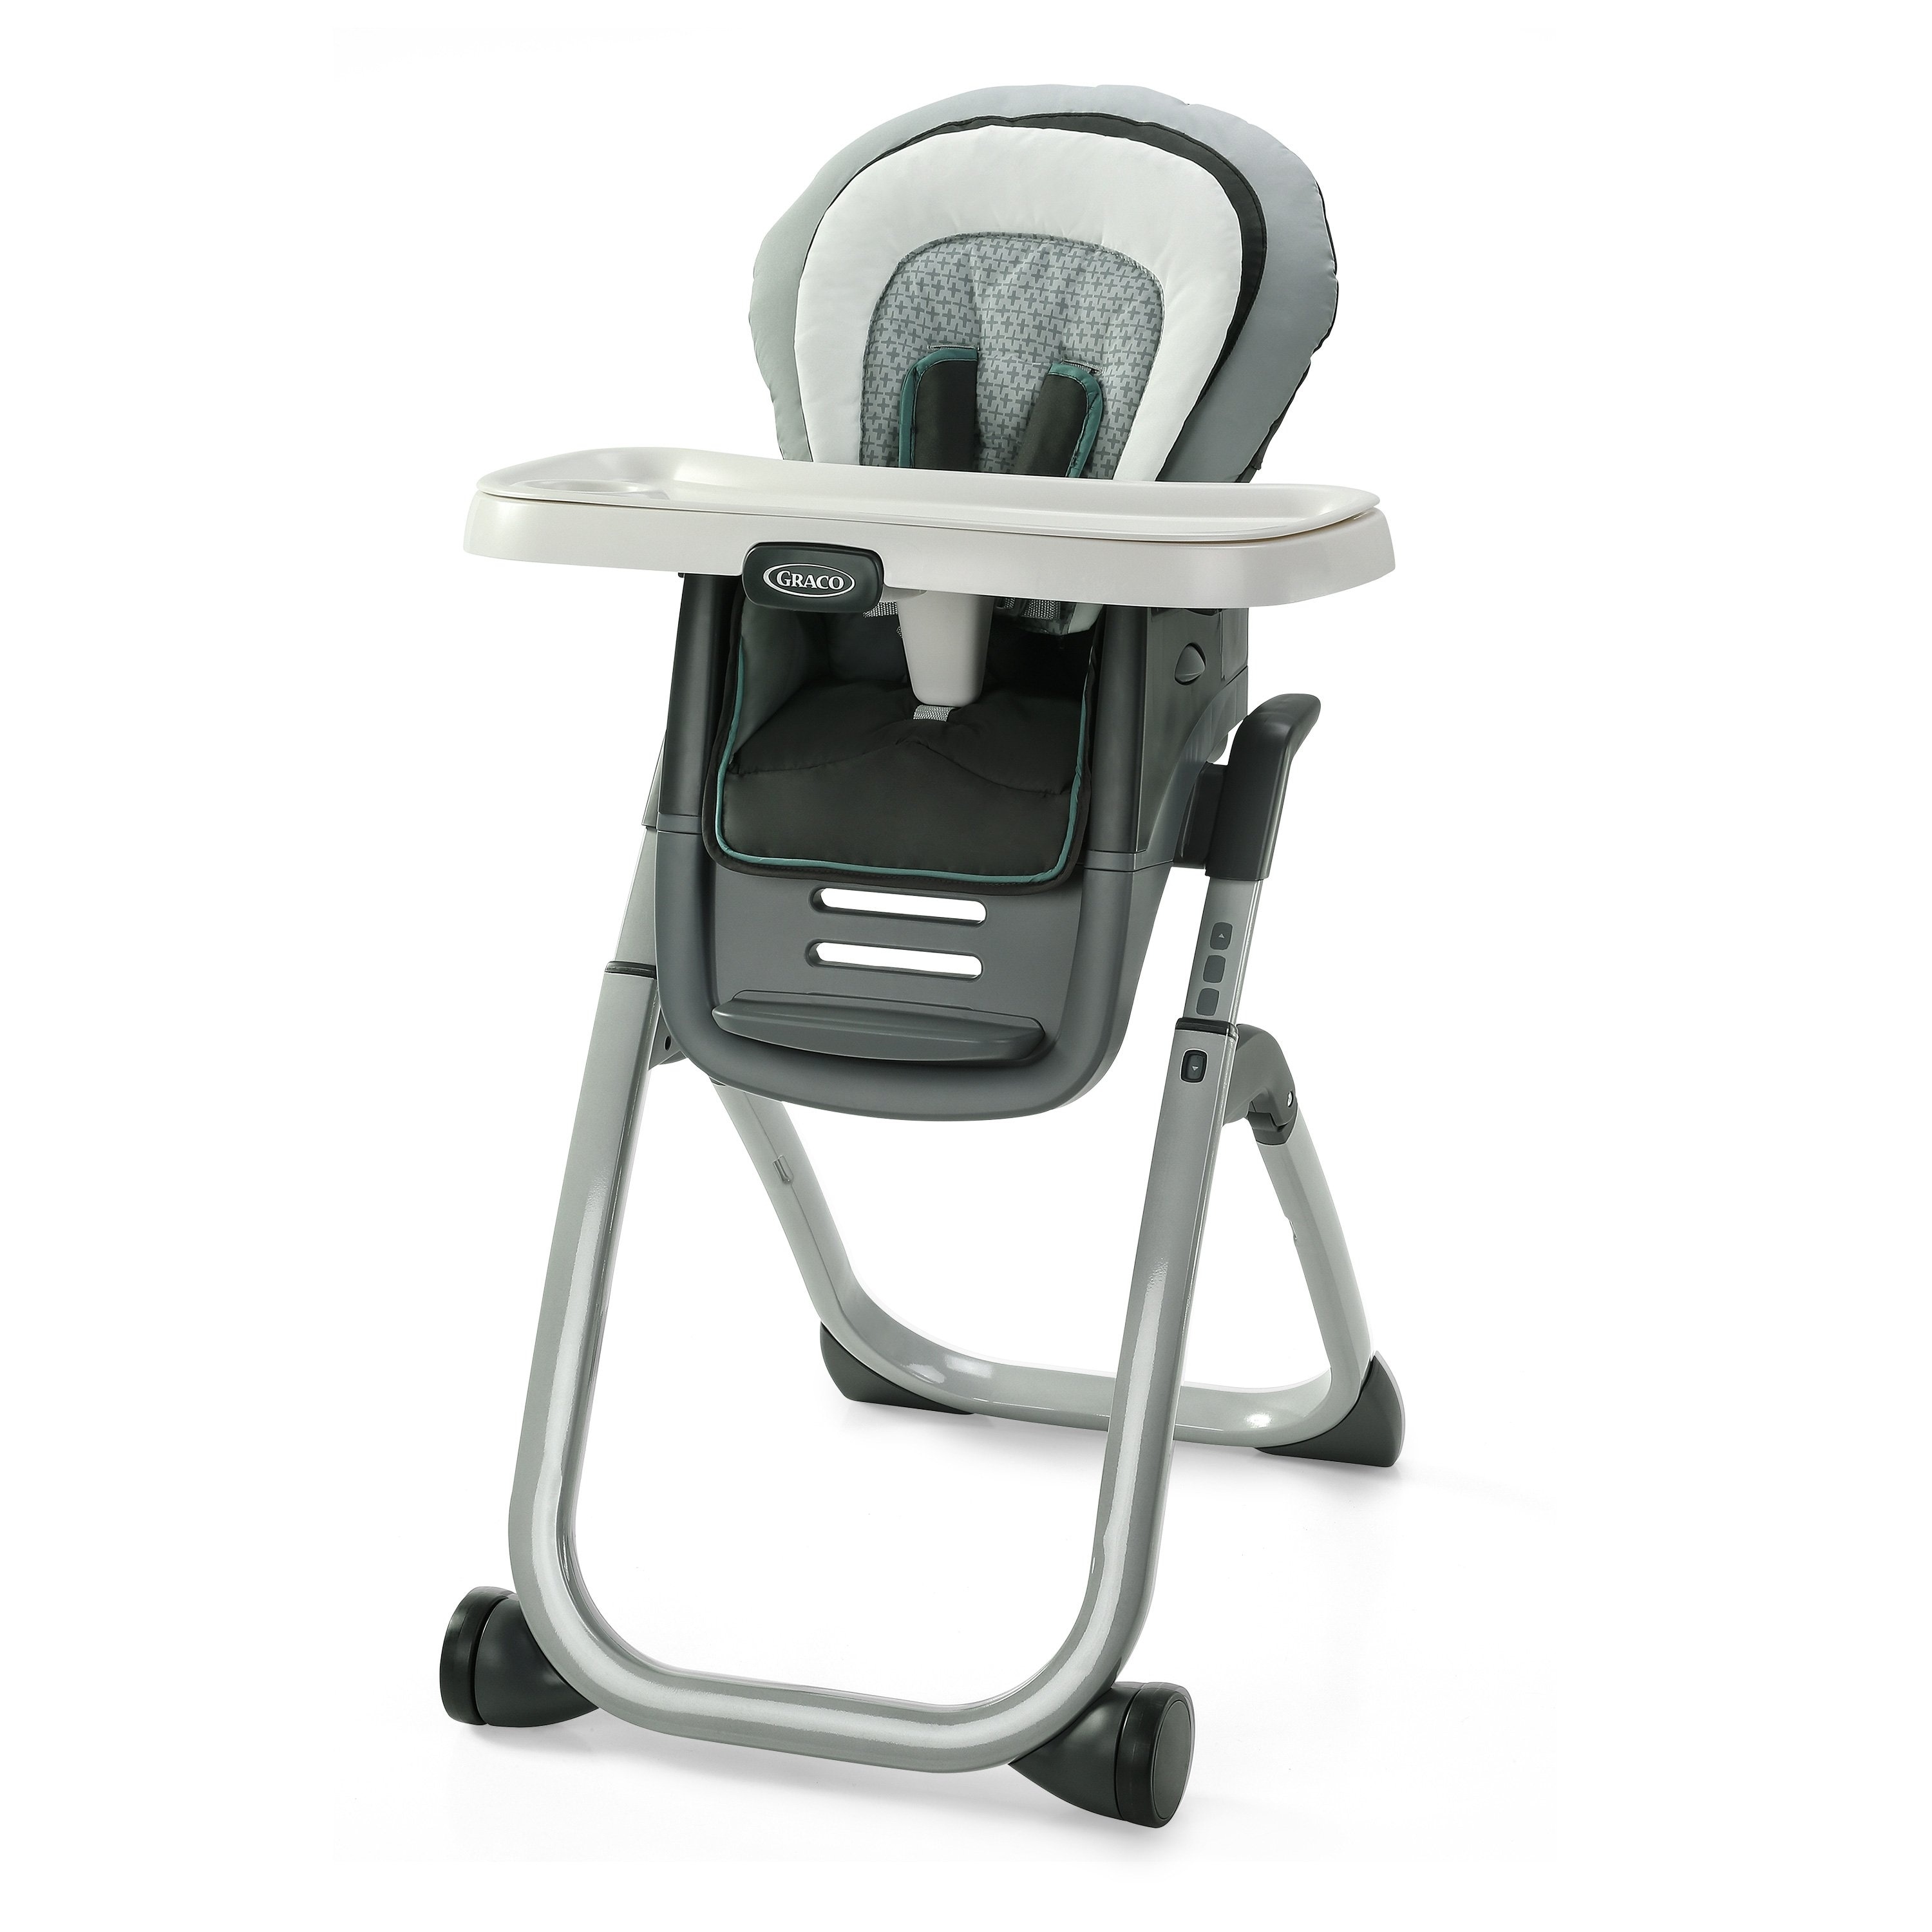 Graco DuoDiner DLX 6-in-1 Highchair, Mathis - N/A